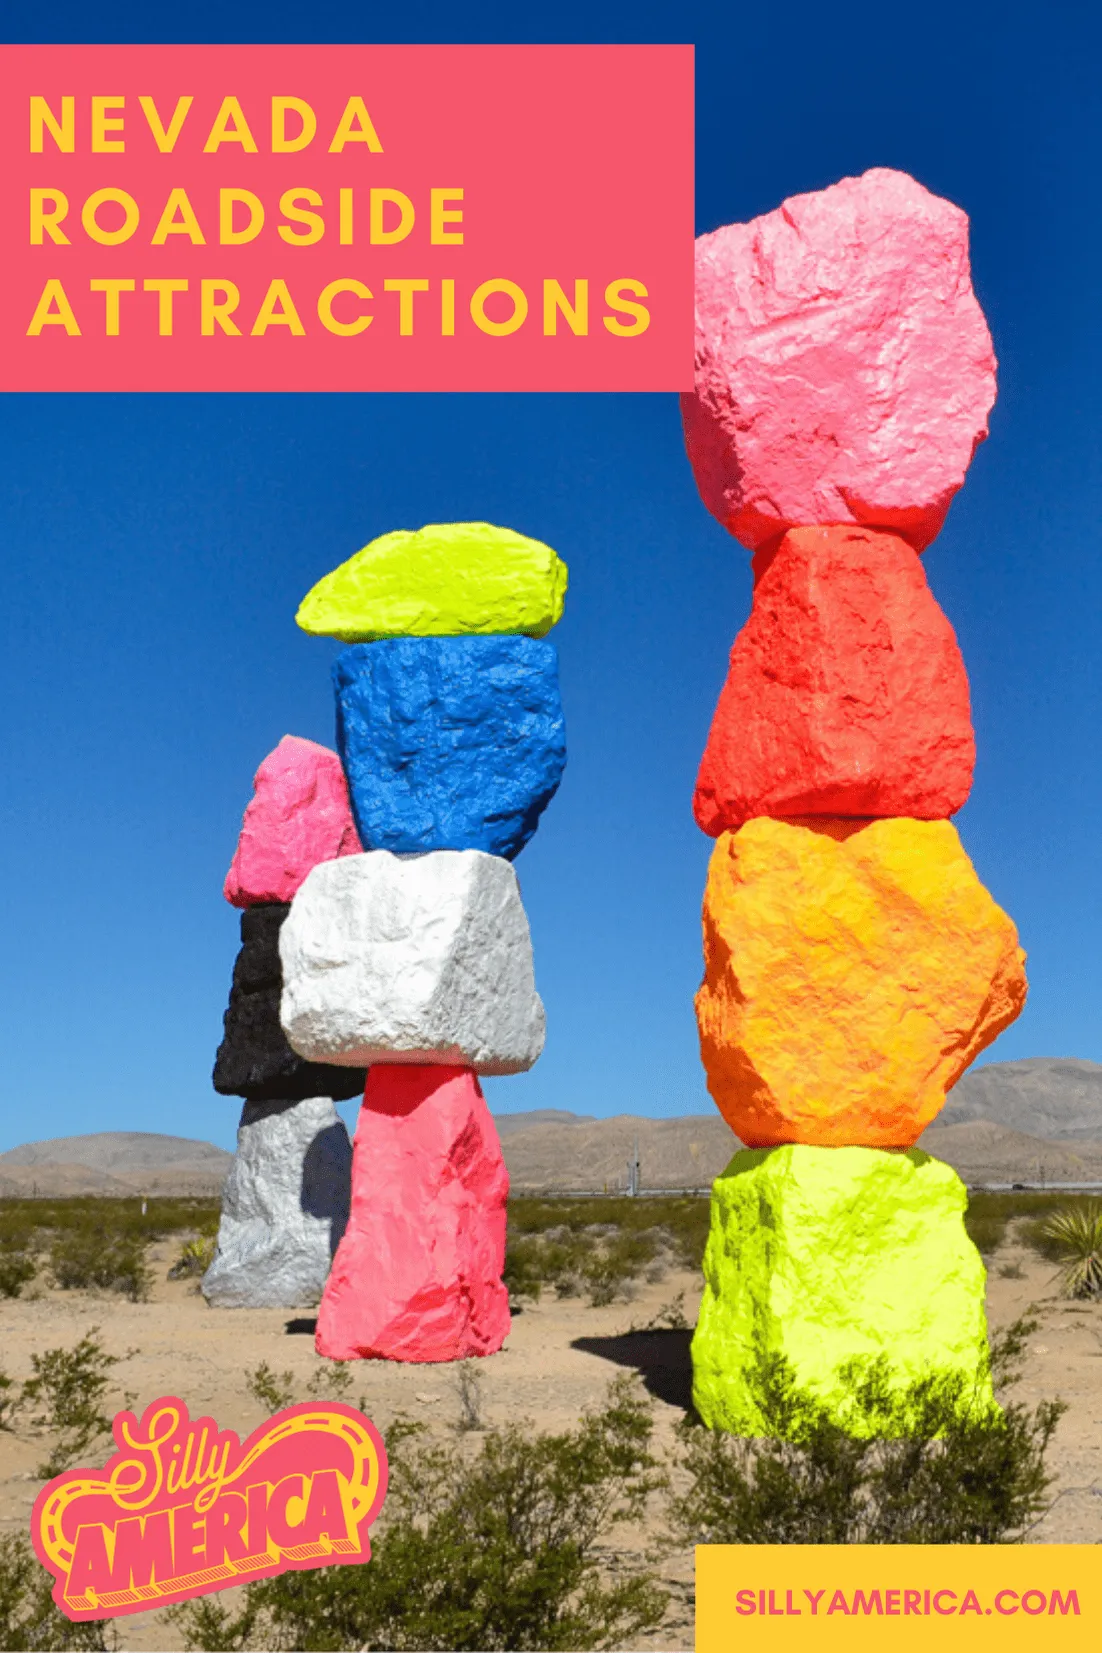 The best Nevada roadside attractions to visit on a Nevada road trip to Las Vegas, Reno, and beyond. Add these roadside oddities to your travel bucket list, itinerary, or route map! Weird roadside attractions in Nevada for kids or adults. #NevadaRoadsideAttractions #NevadaRoadsideAttraction #RoadsideAttractions #RoadsideAttraction #RoadTrip #NevadaRoadTrip #NevadaRoadTripMap #LakeTahoeRoadTrip #ValleyOfFireRoadTrip #NevadaRoadTripAdventure #LasVegasRoadTrip #LasVegas #WeirdRoadsideAttractions